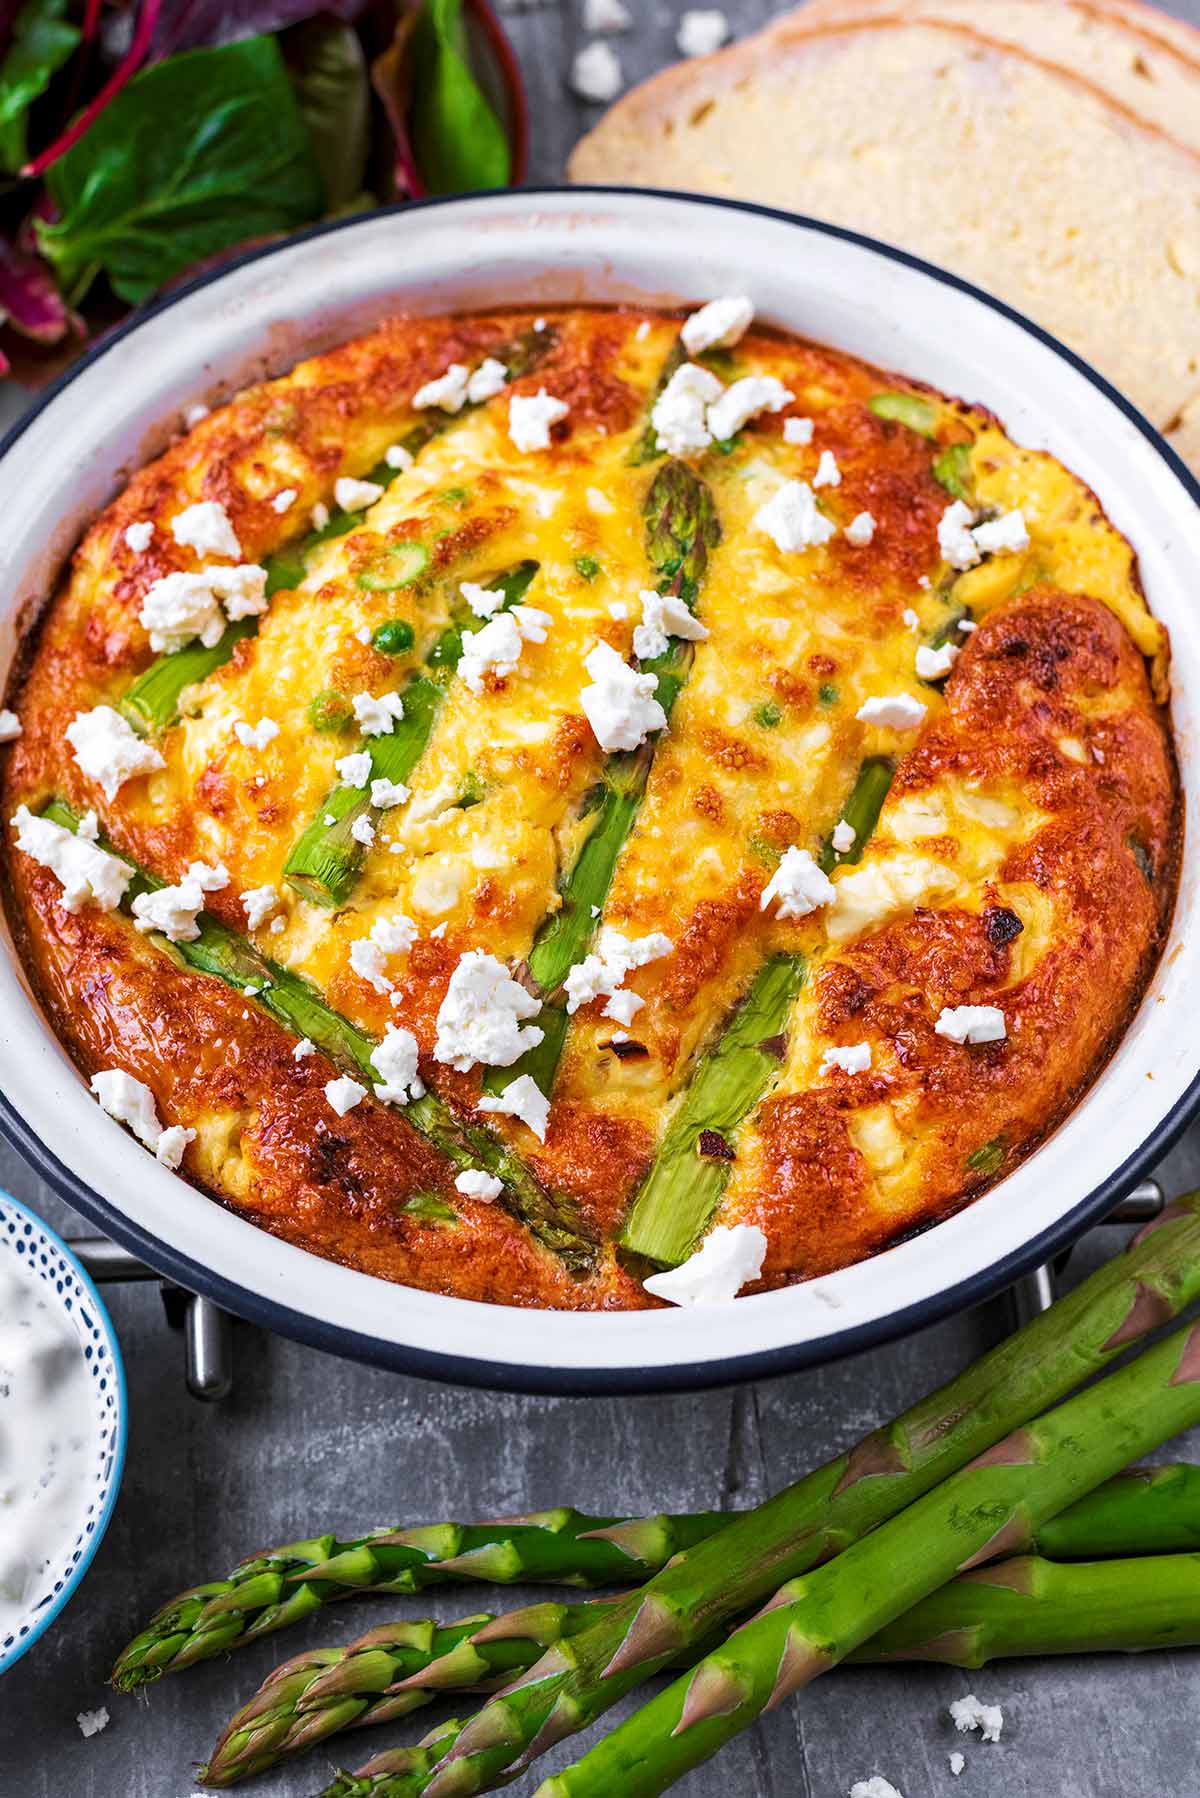 Baked frittata with asparagus and slices of bread.